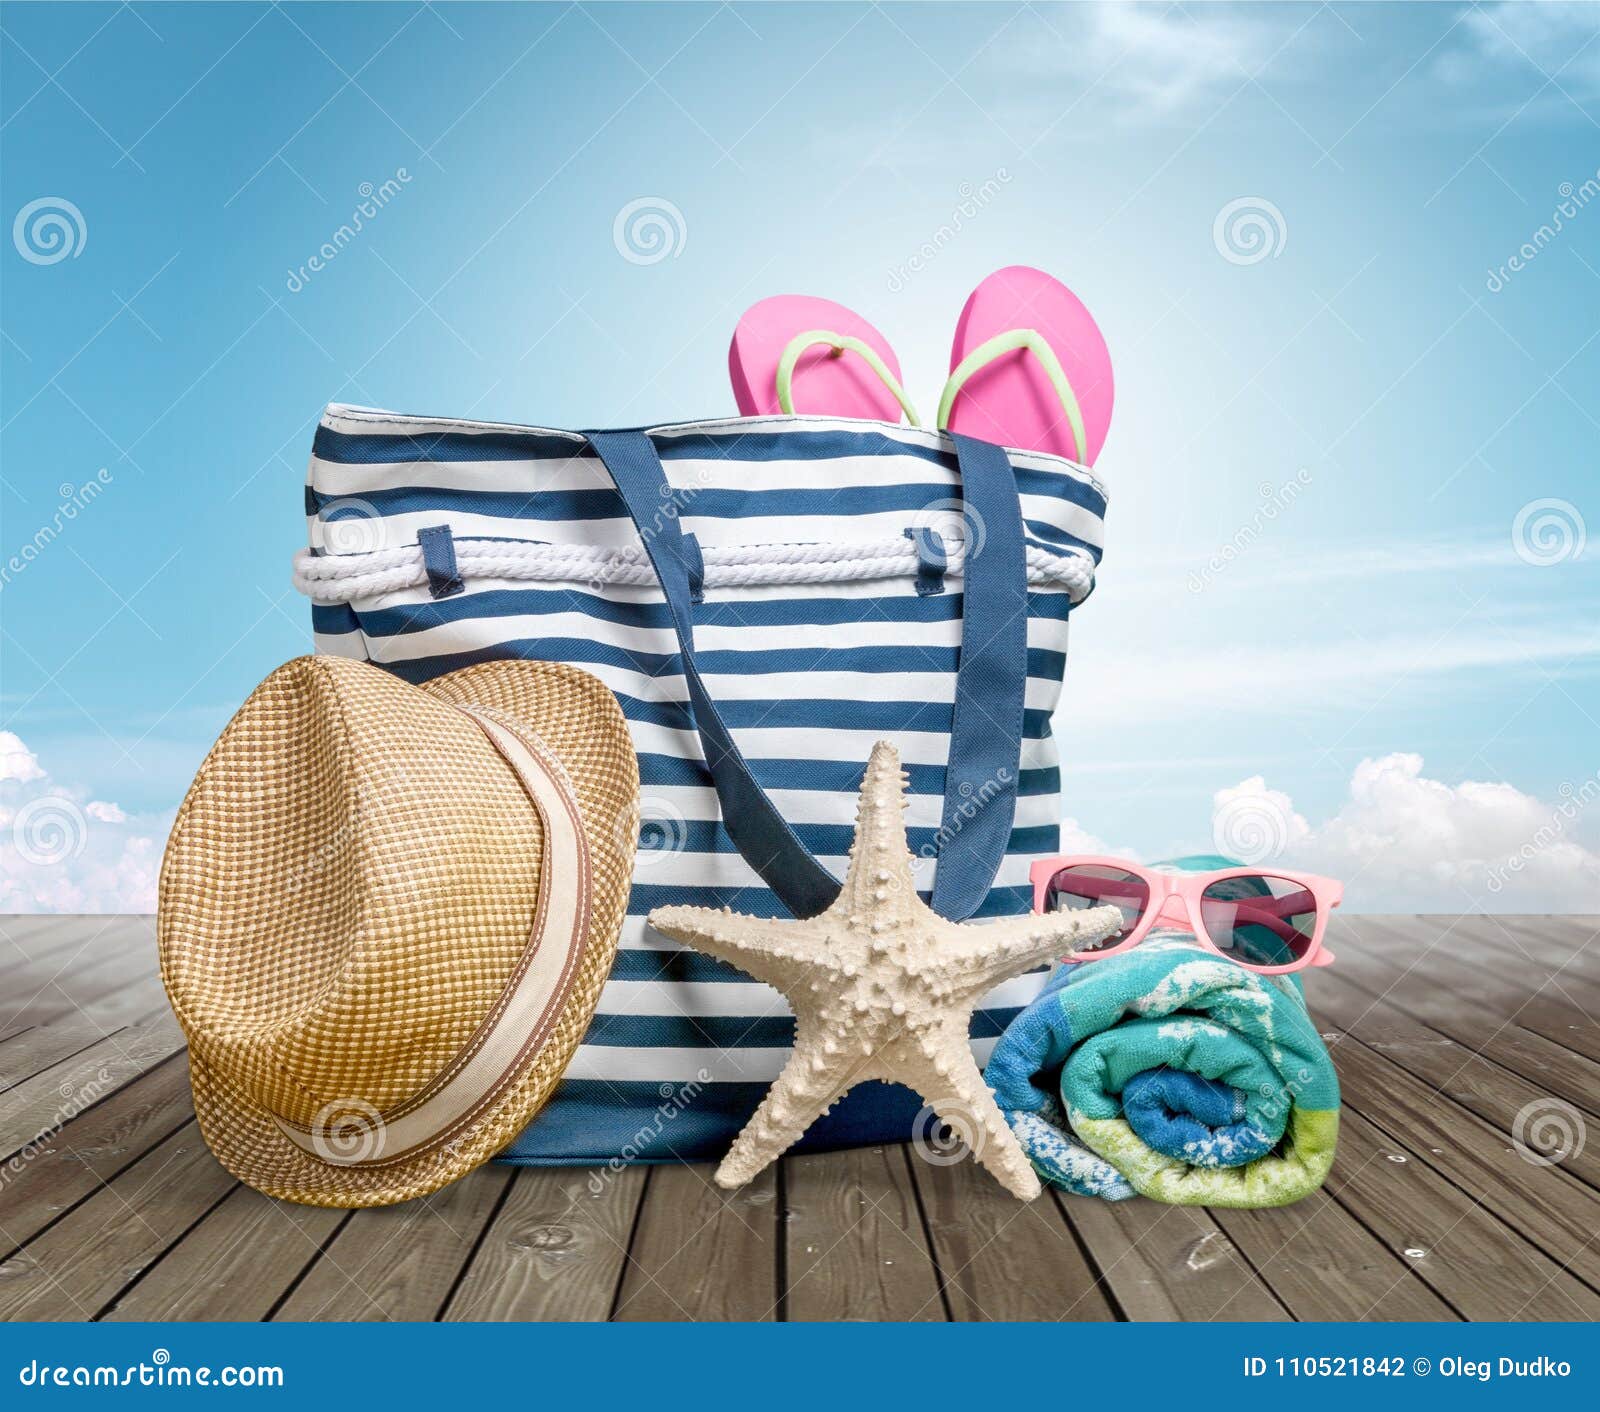 Beach Accessories On The Desk Stock Photo Image Of Group Shoe